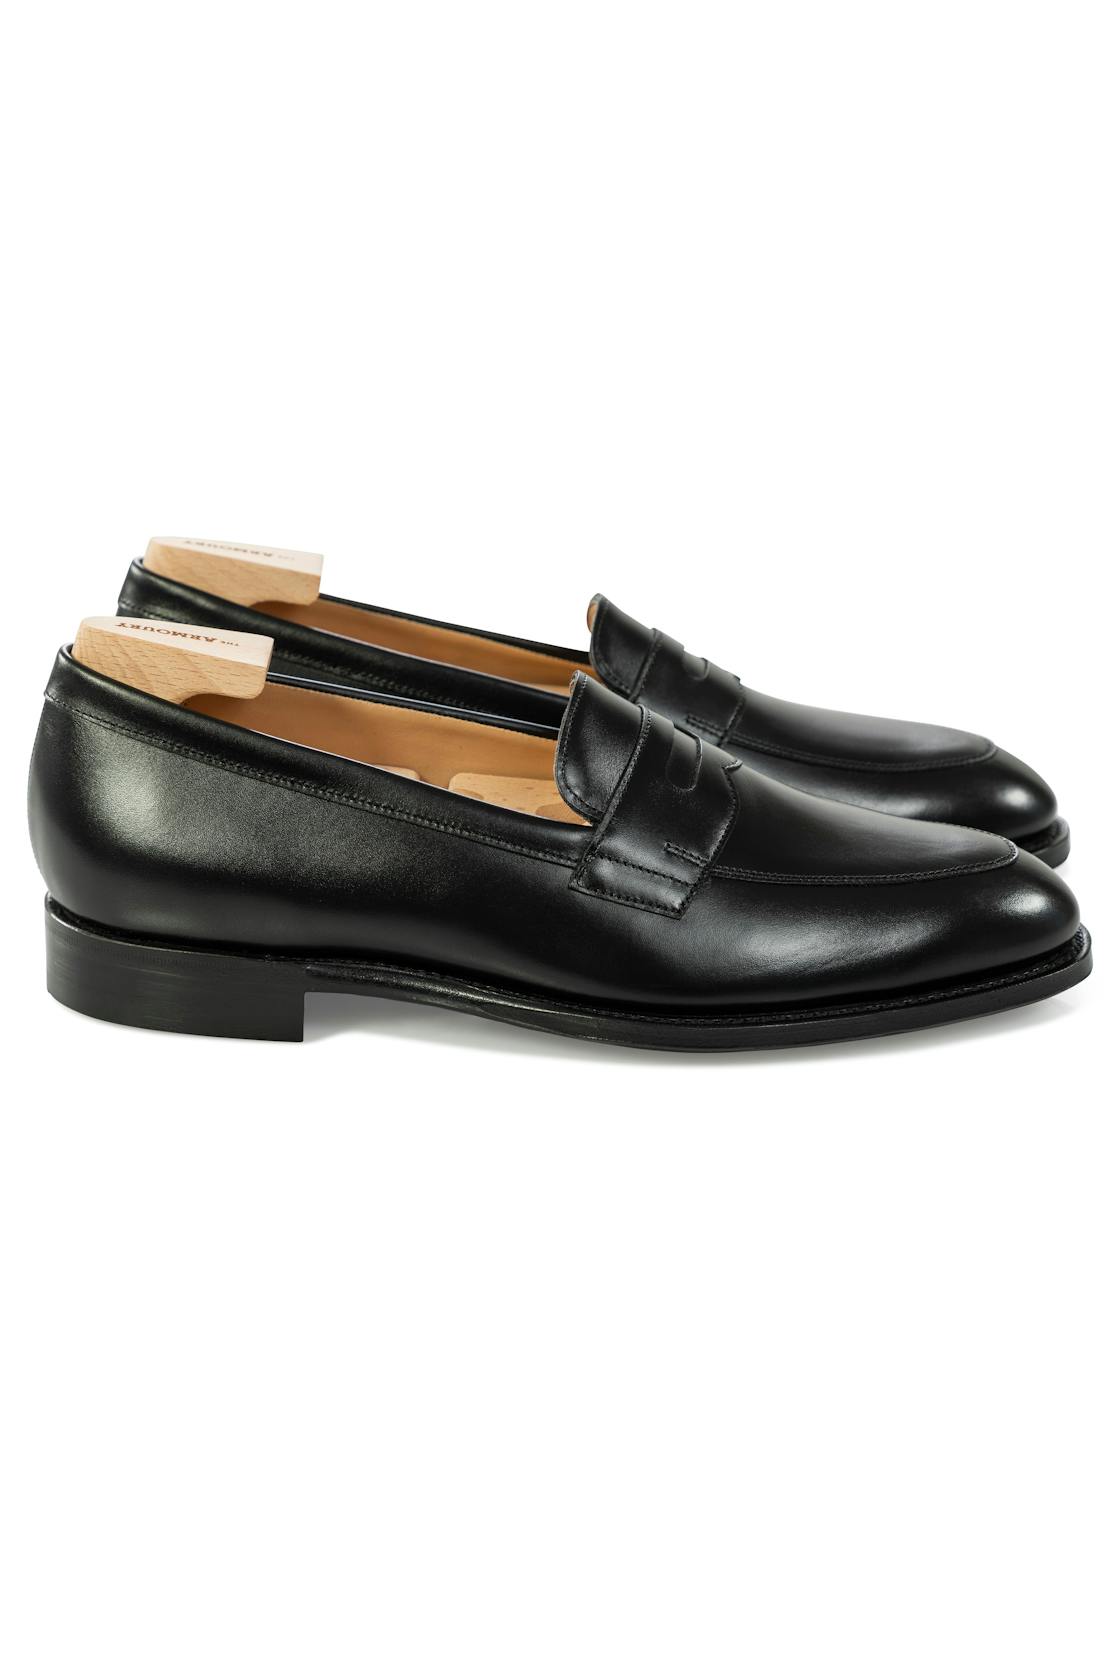 The Armoury Duane II Black Calf Penny Loafers *factory seconds*